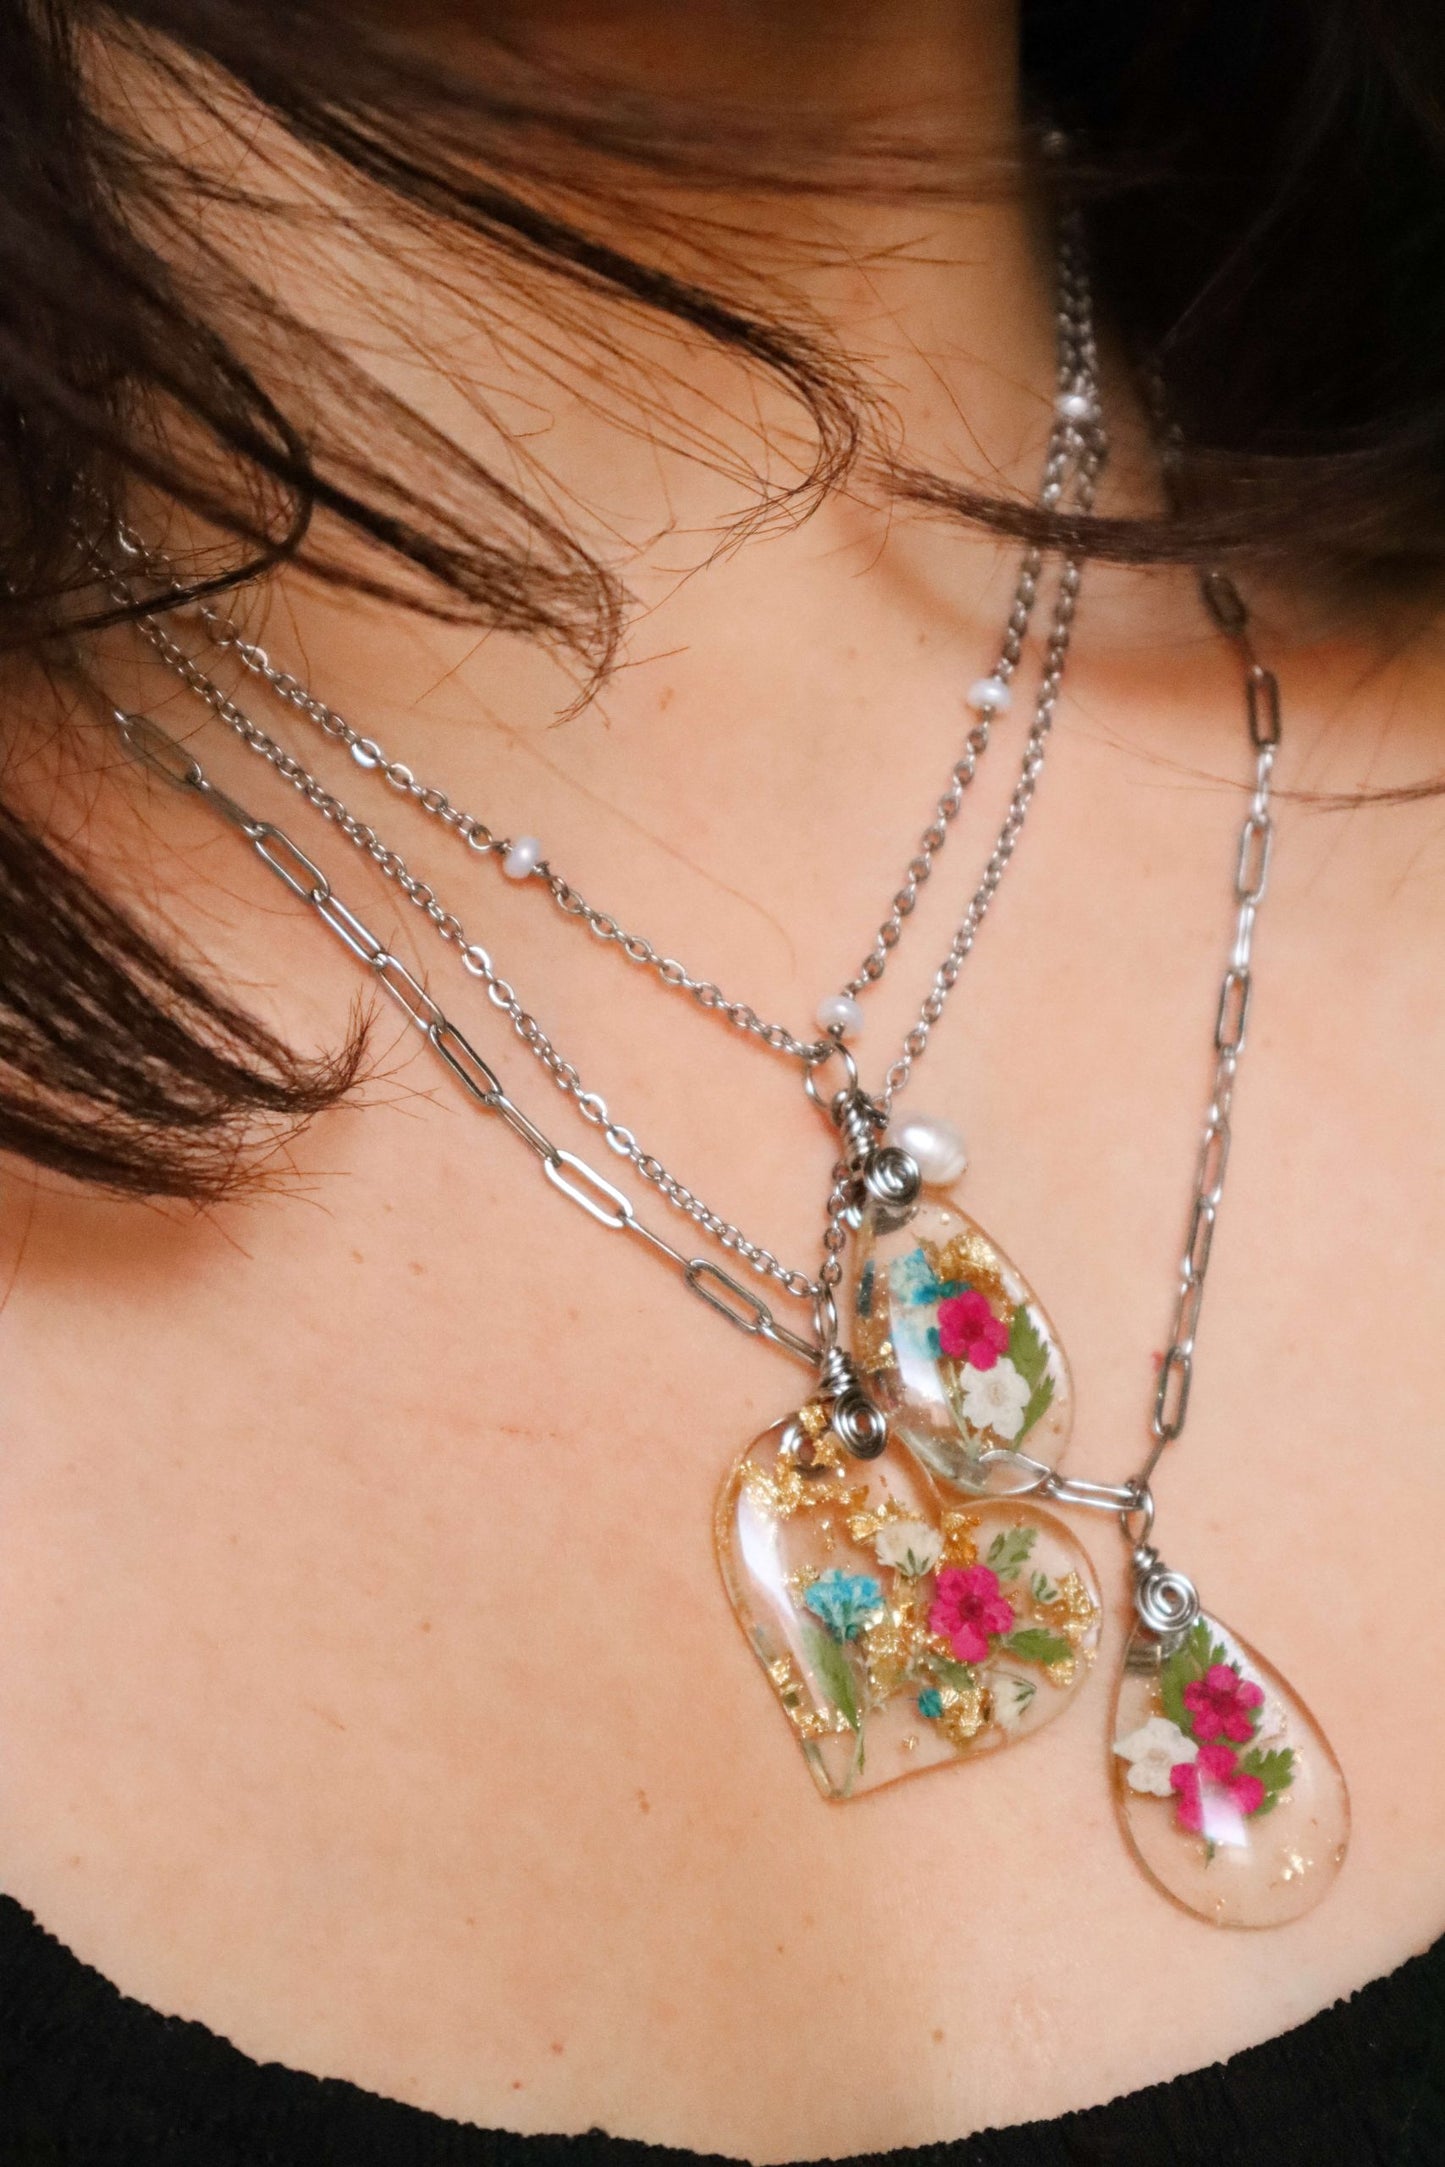 Pressed-Flower-Necklaces-Real-Flower-Necklace-Various-Stainless-Steel-Necklace-Chains-Teardrop-Pendants-Heart-Pendant-Kaleidoscopes-And-Polka-Dots